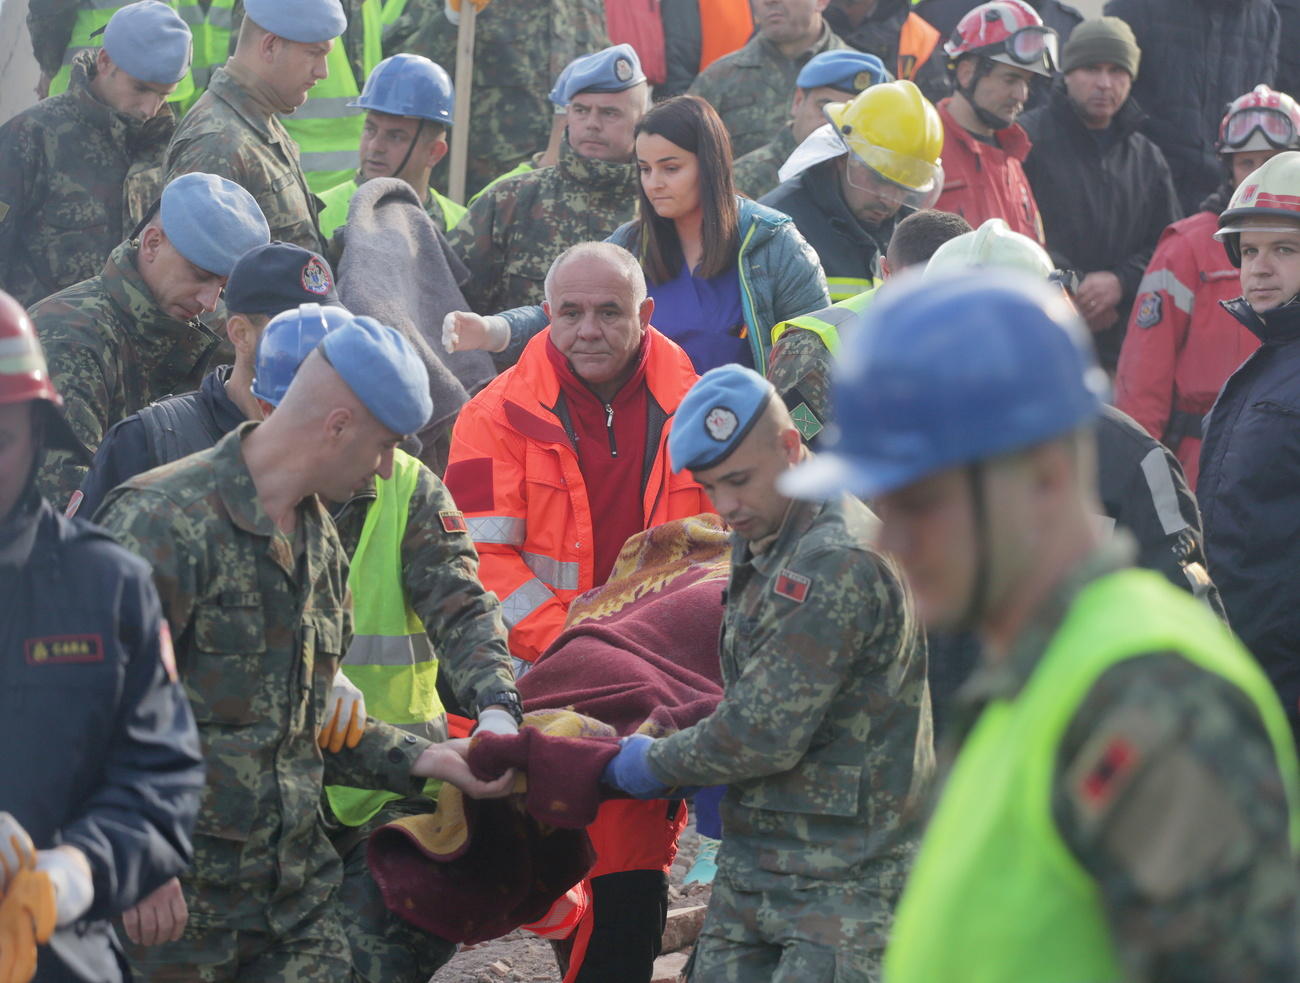 Rescue workers in Albania